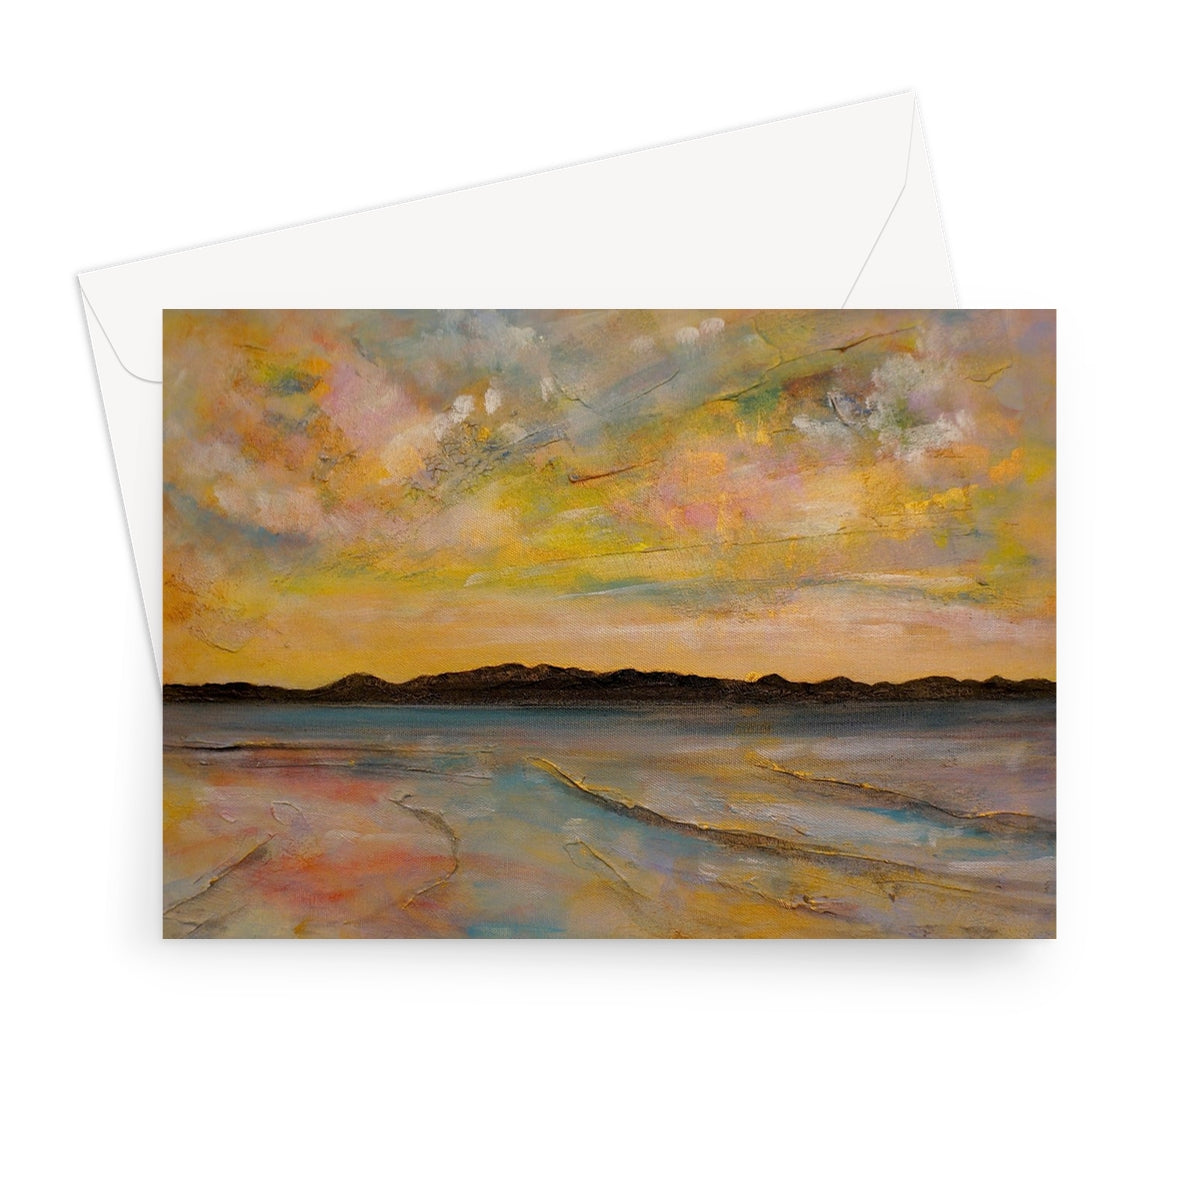 Vallay Island North Uist Art Gifts Greeting Card-Greetings Cards-Hebridean Islands Art Gallery-7"x5"-10 Cards-Paintings, Prints, Homeware, Art Gifts From Scotland By Scottish Artist Kevin Hunter